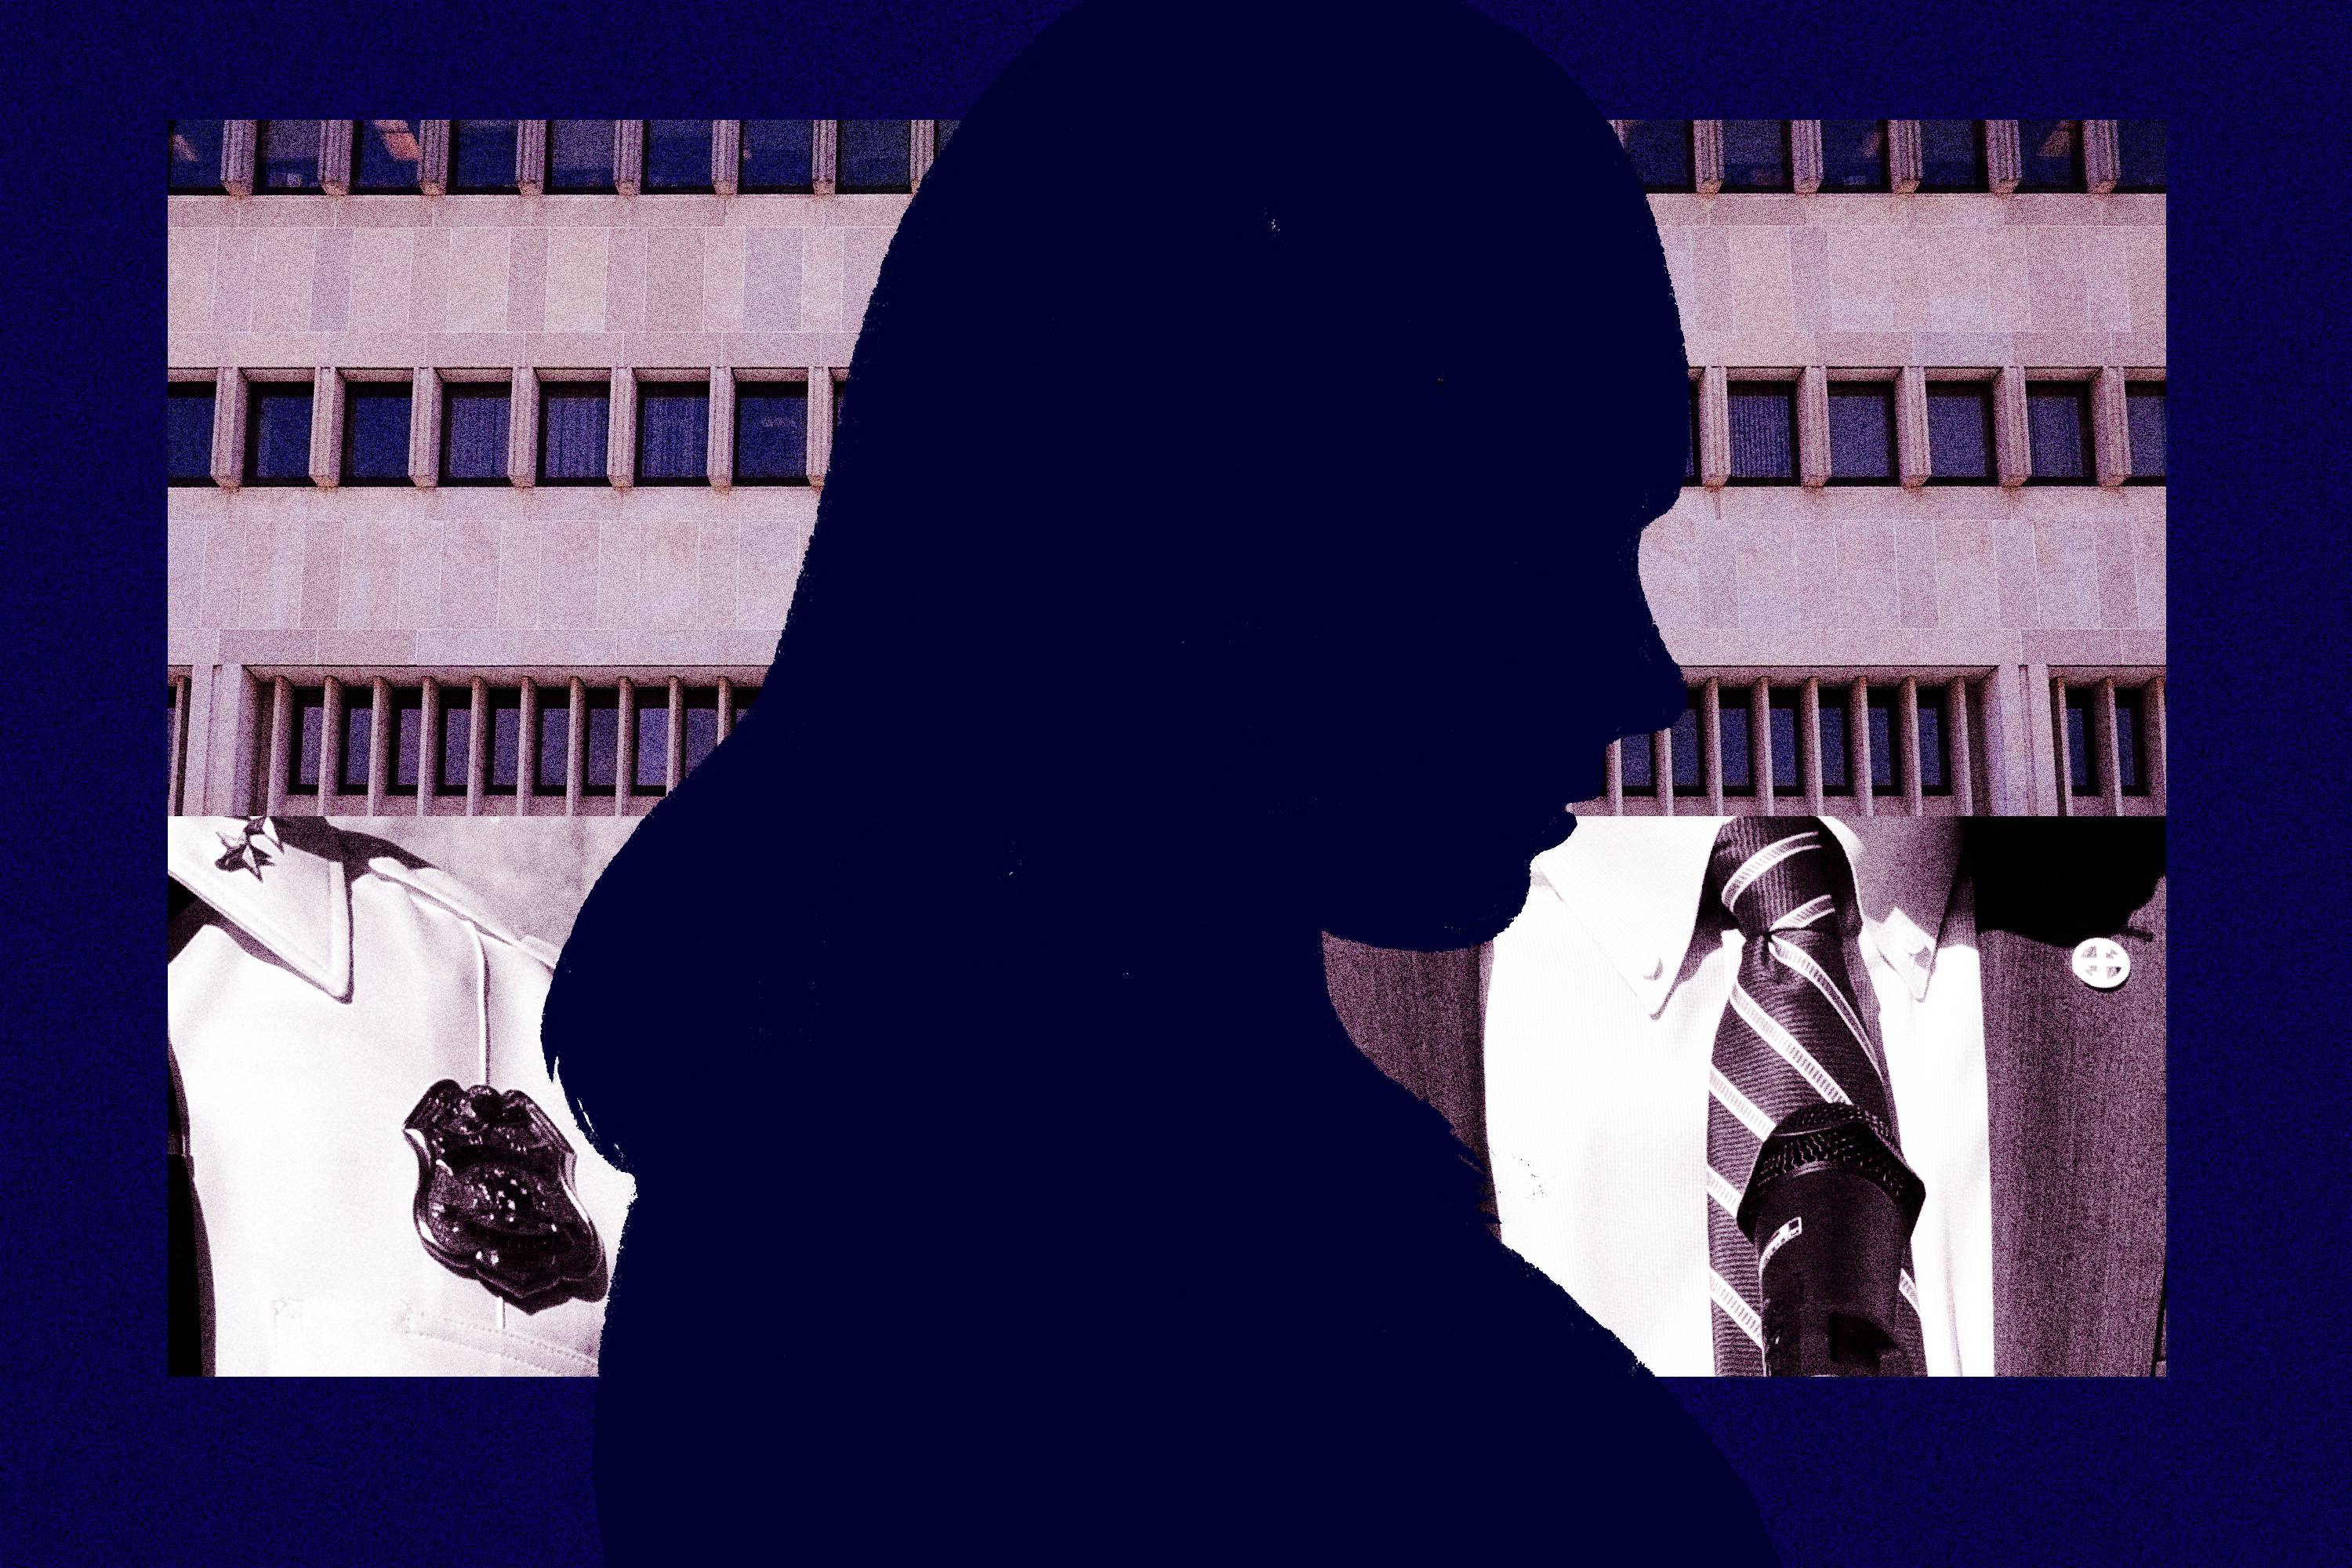 Illustration of young woman's profile in front of facade of county courts building, police officer, and official in suit.